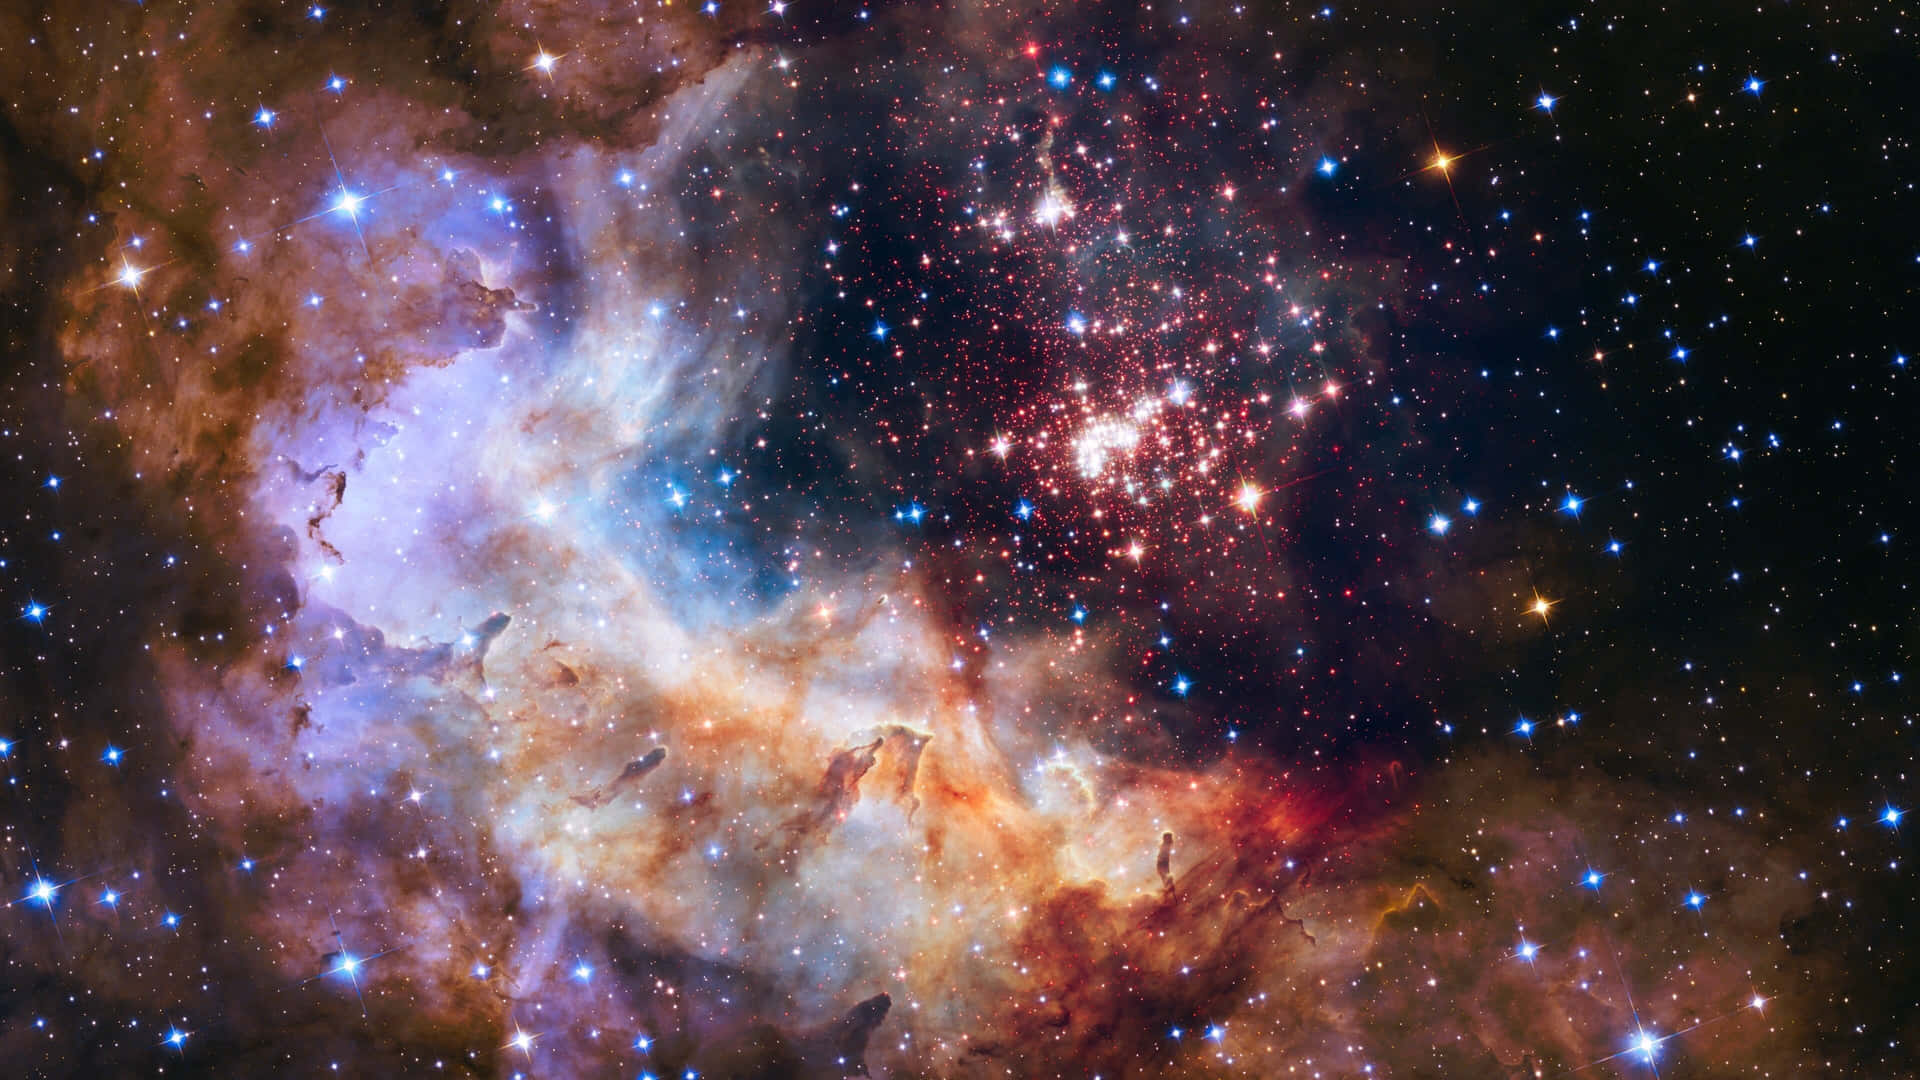 Explore the depths of outer space in full 4K clarity